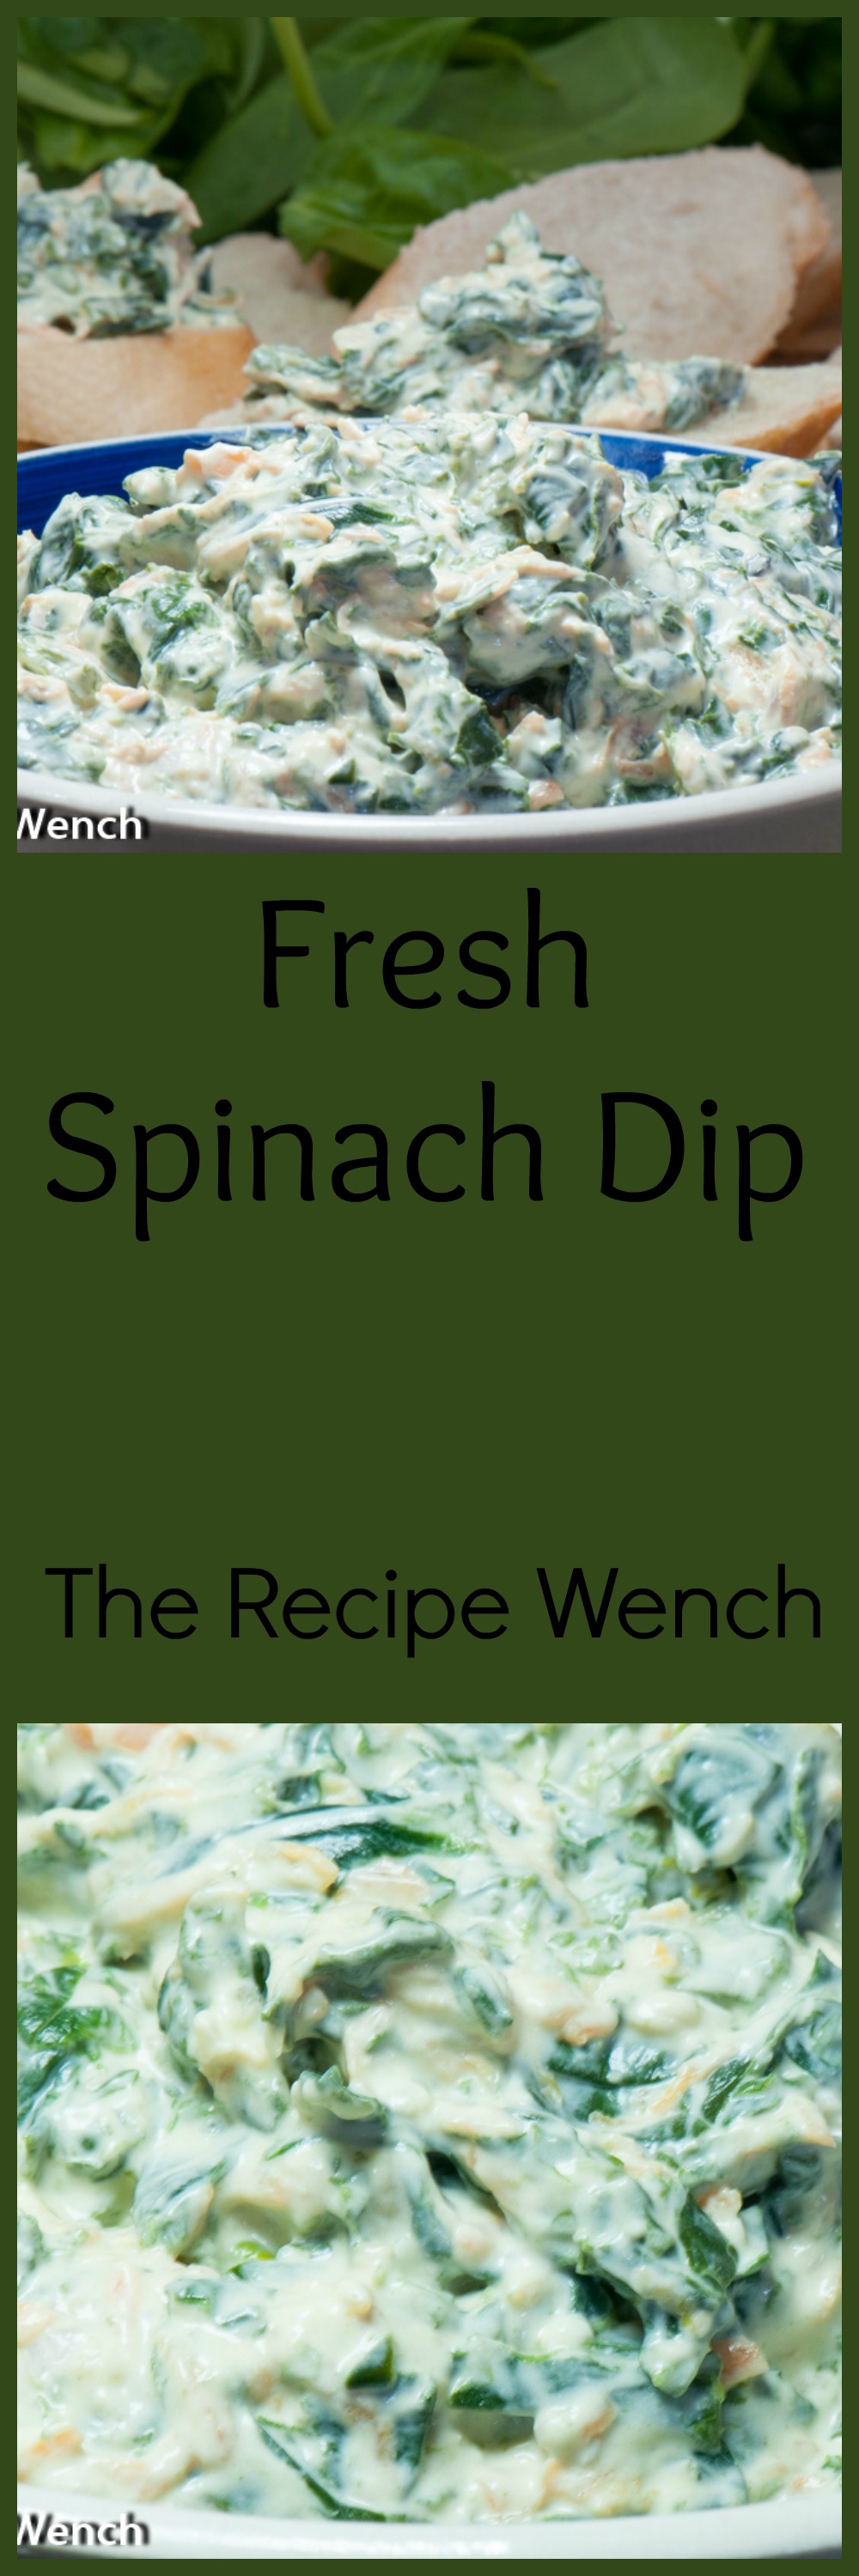 The Recipe Wench